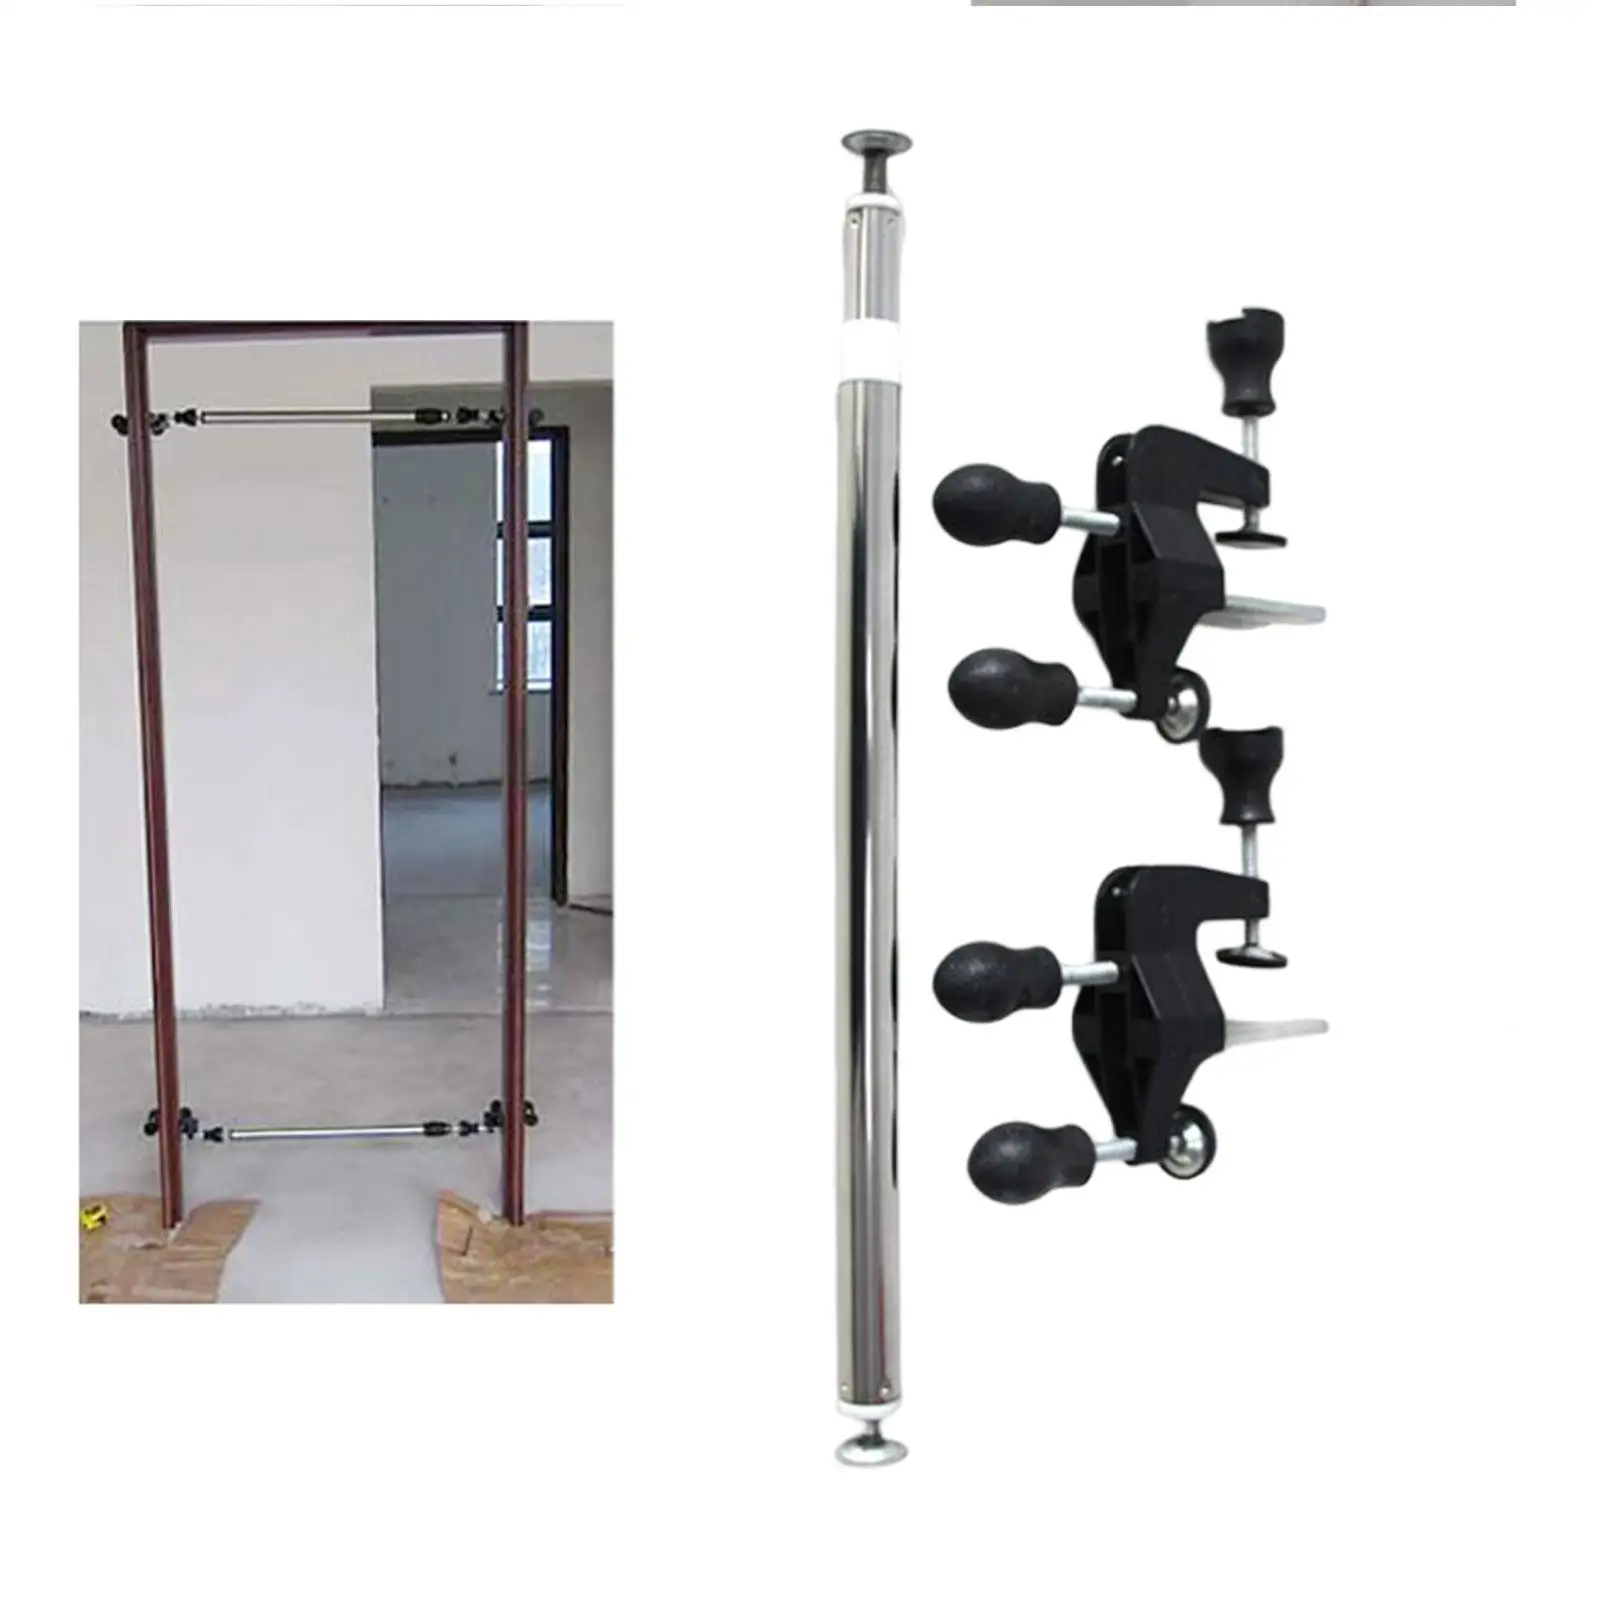 Portable Wooden Door Installer Set Angle Adjuster Installation Device Aids Stainless Steel Gadgets for Home Decor Construction